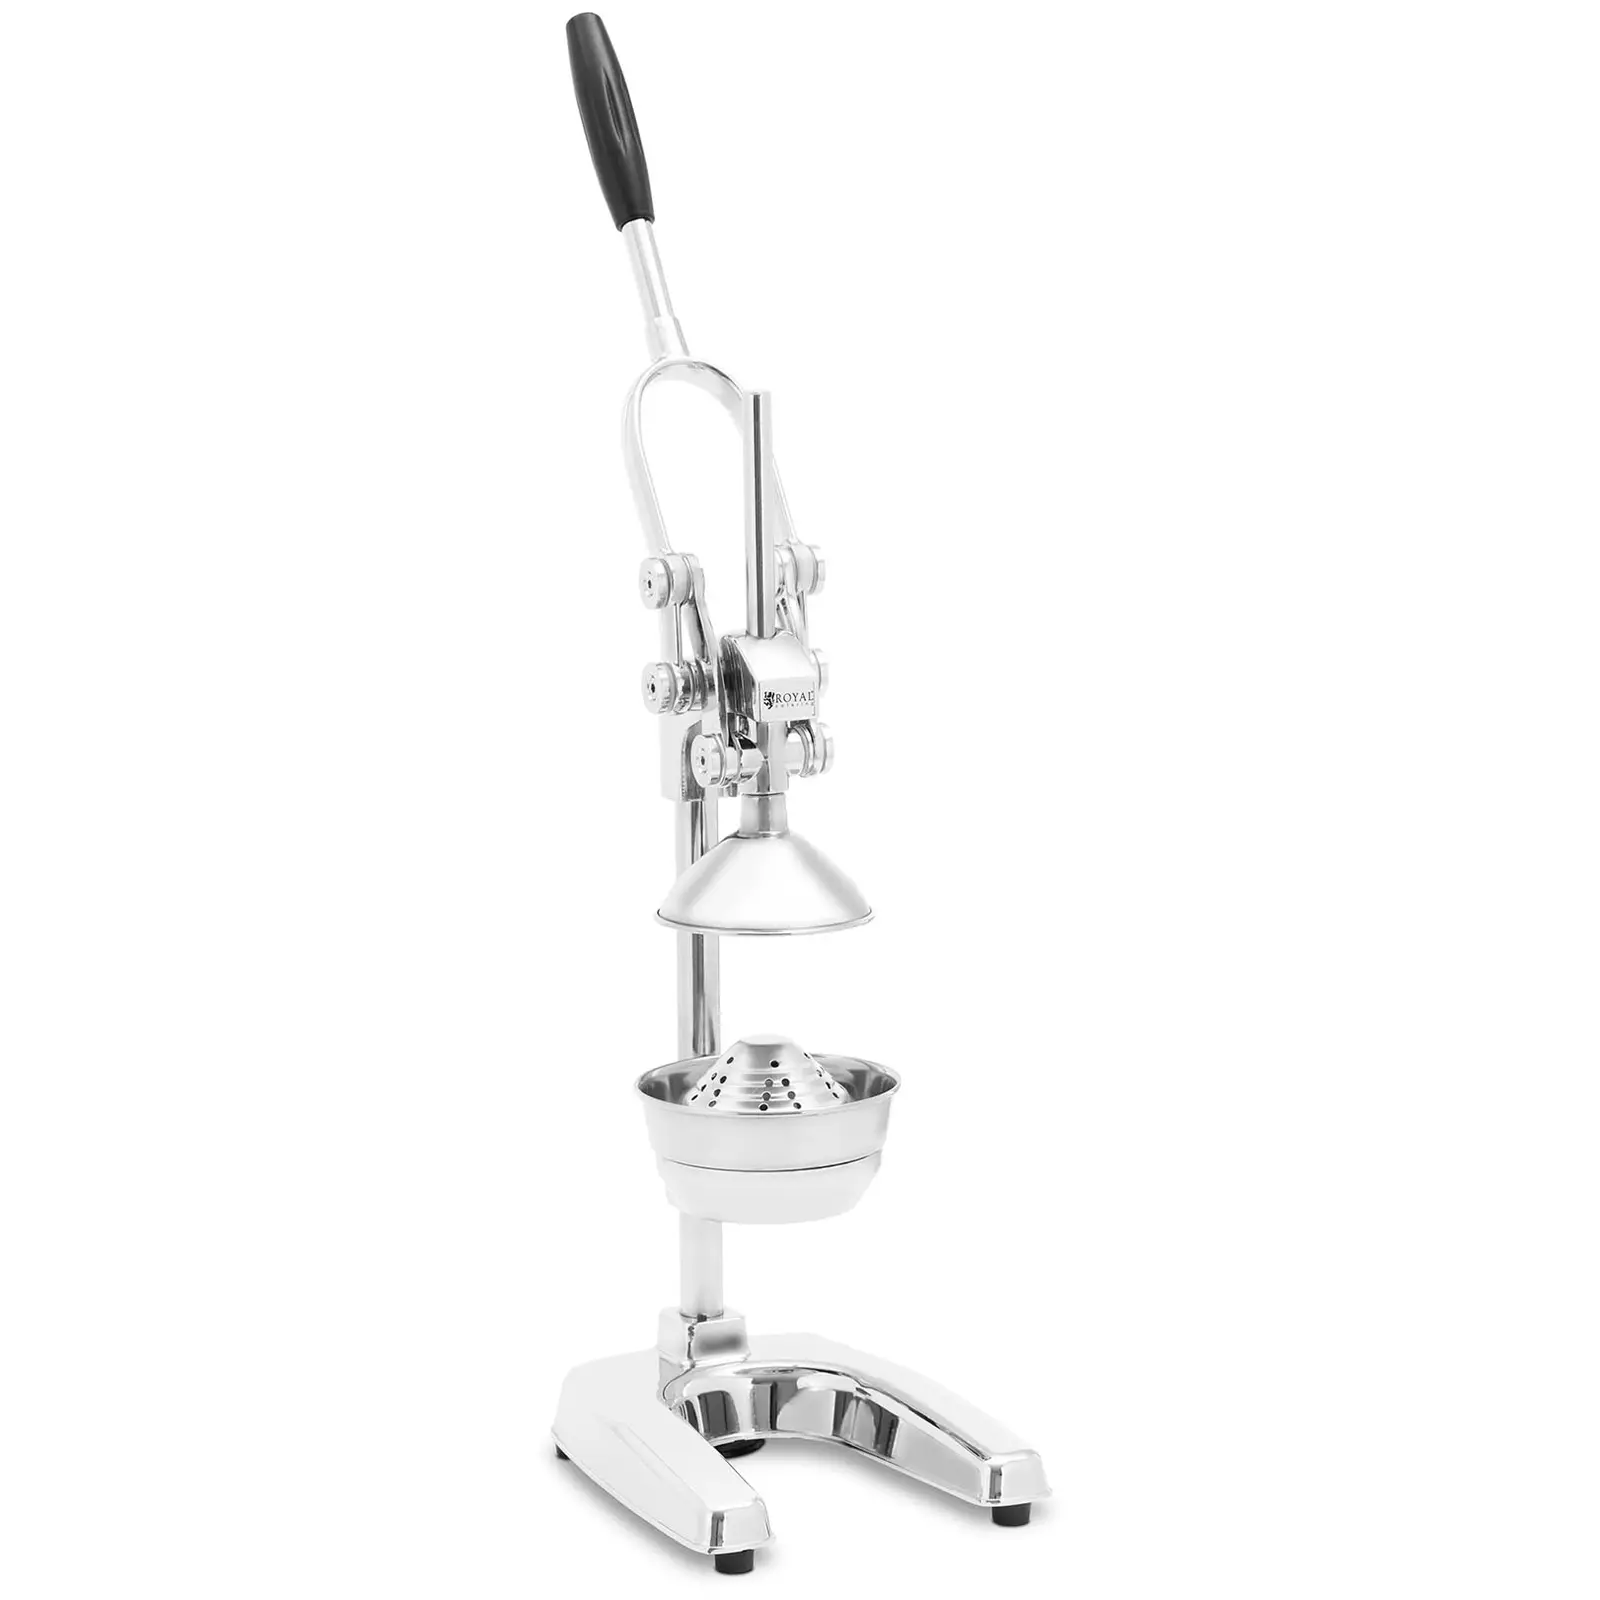 Manual Juicer - Stainless steel - 1-hand operation - Royal Catering